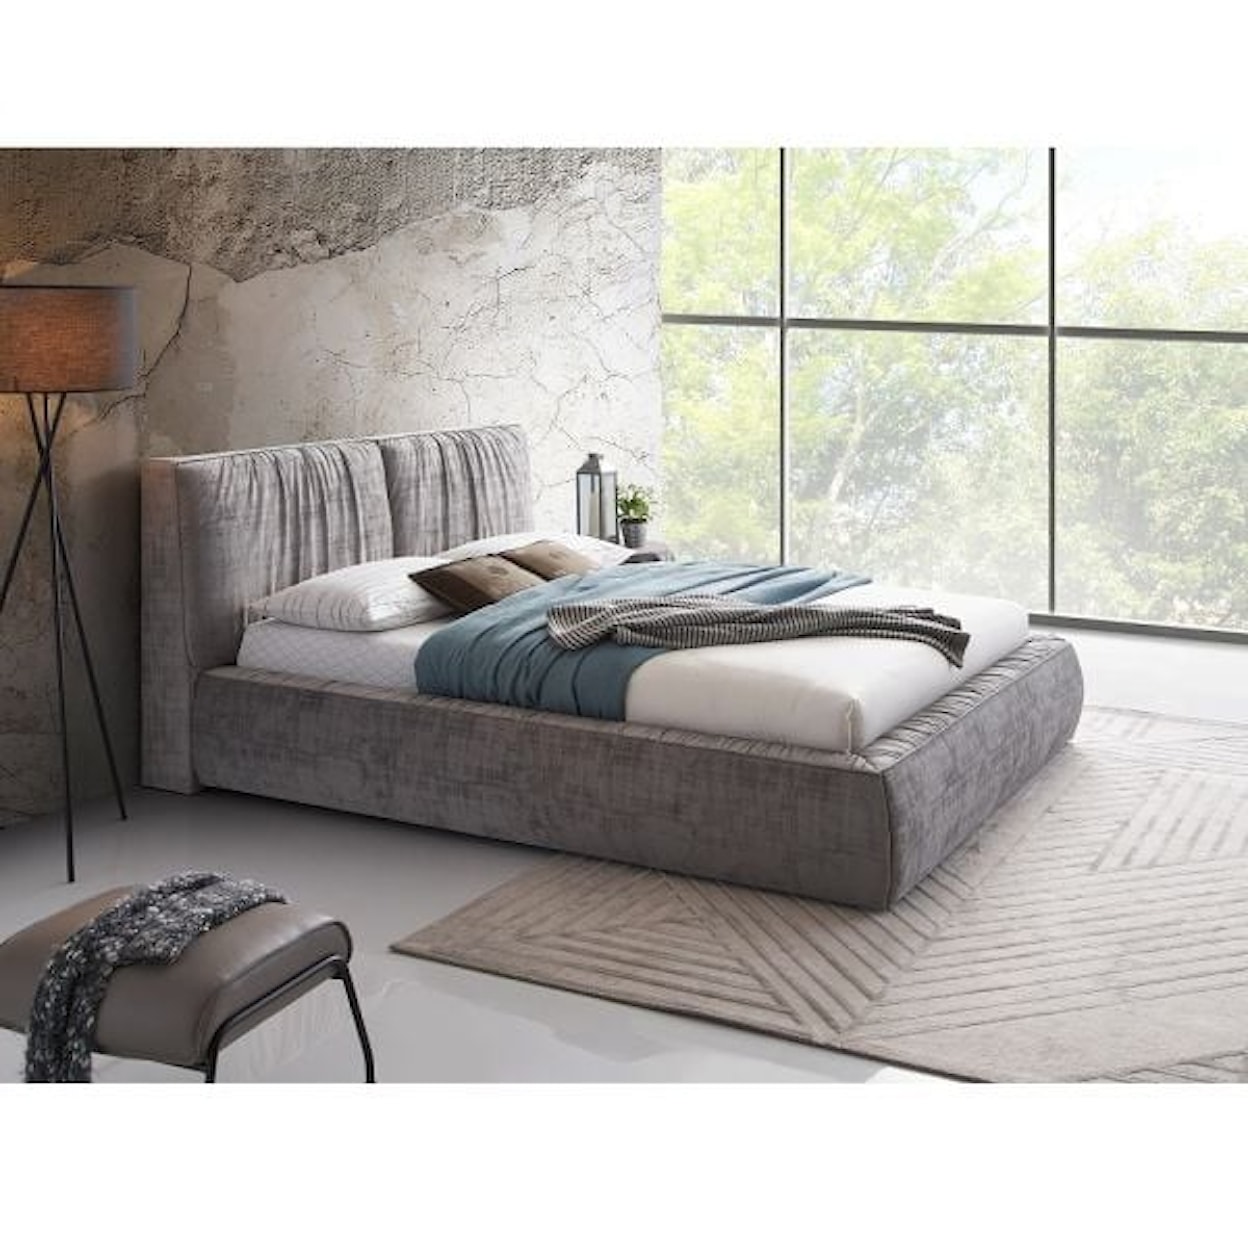 Acme Furniture Onfroi King Upholstered Bed